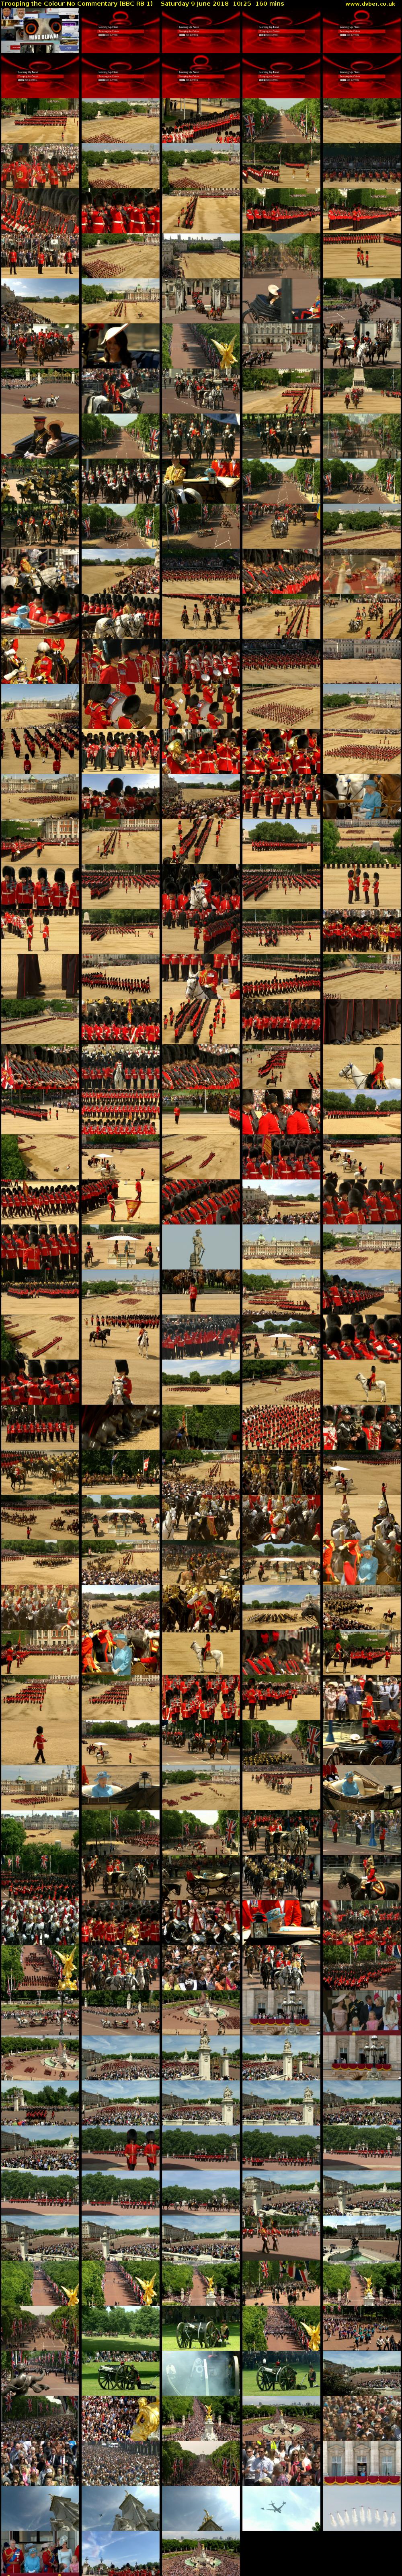 Trooping the Colour No Commentary (BBC RB 1) Saturday 9 June 2018 10:25 - 13:05